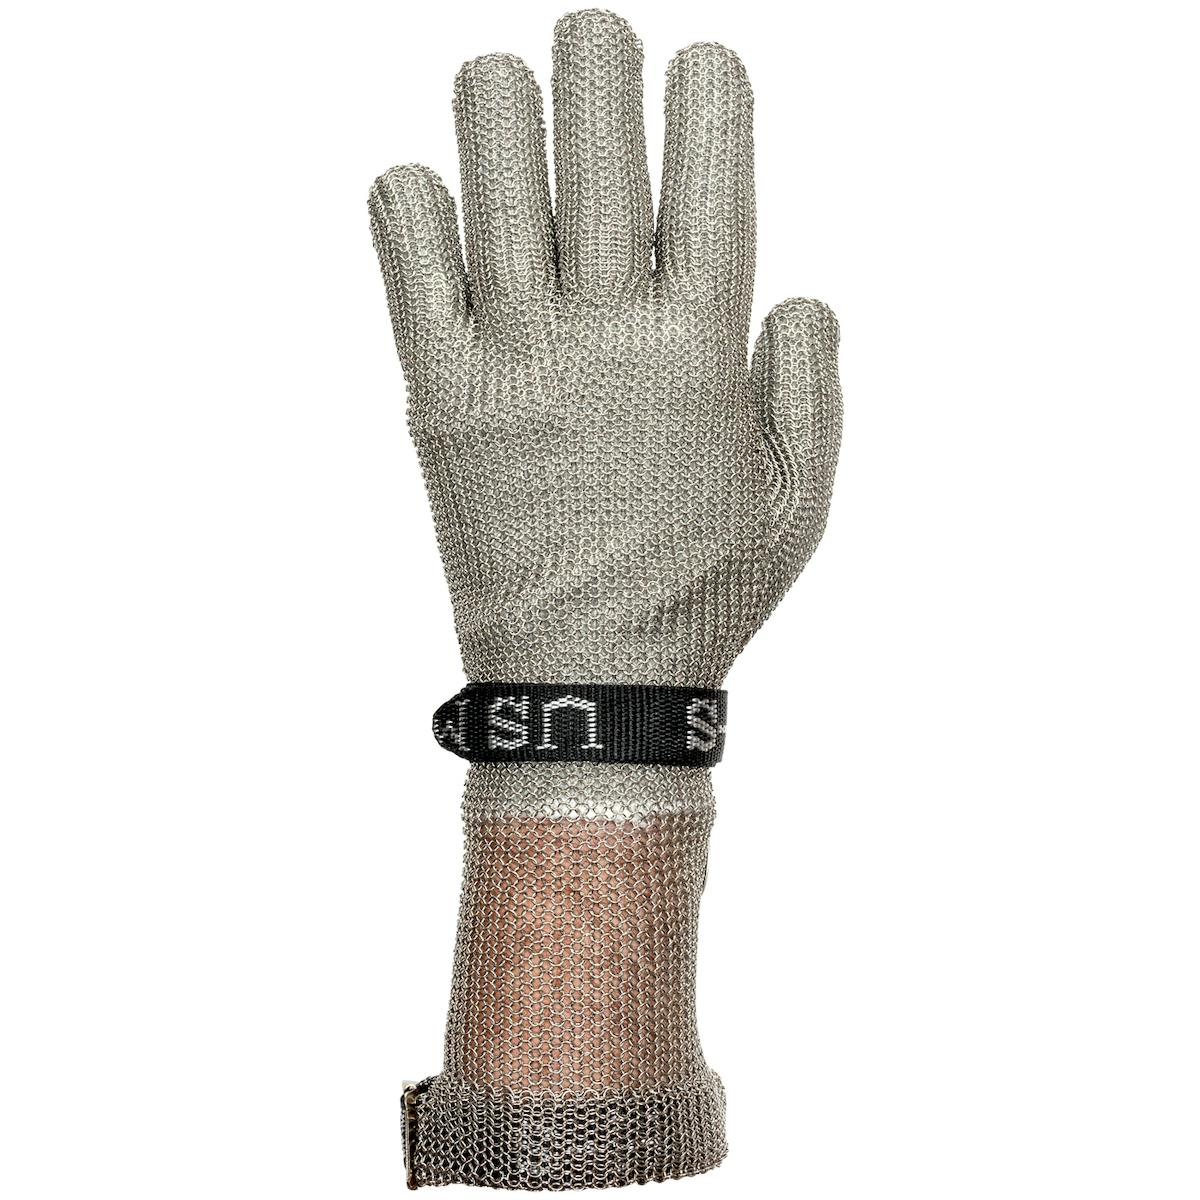 US Mesh® Stainless Steel Mesh Glove with Adjustable Snap-Back Strap Closure - Forearm Length (USM-1305)